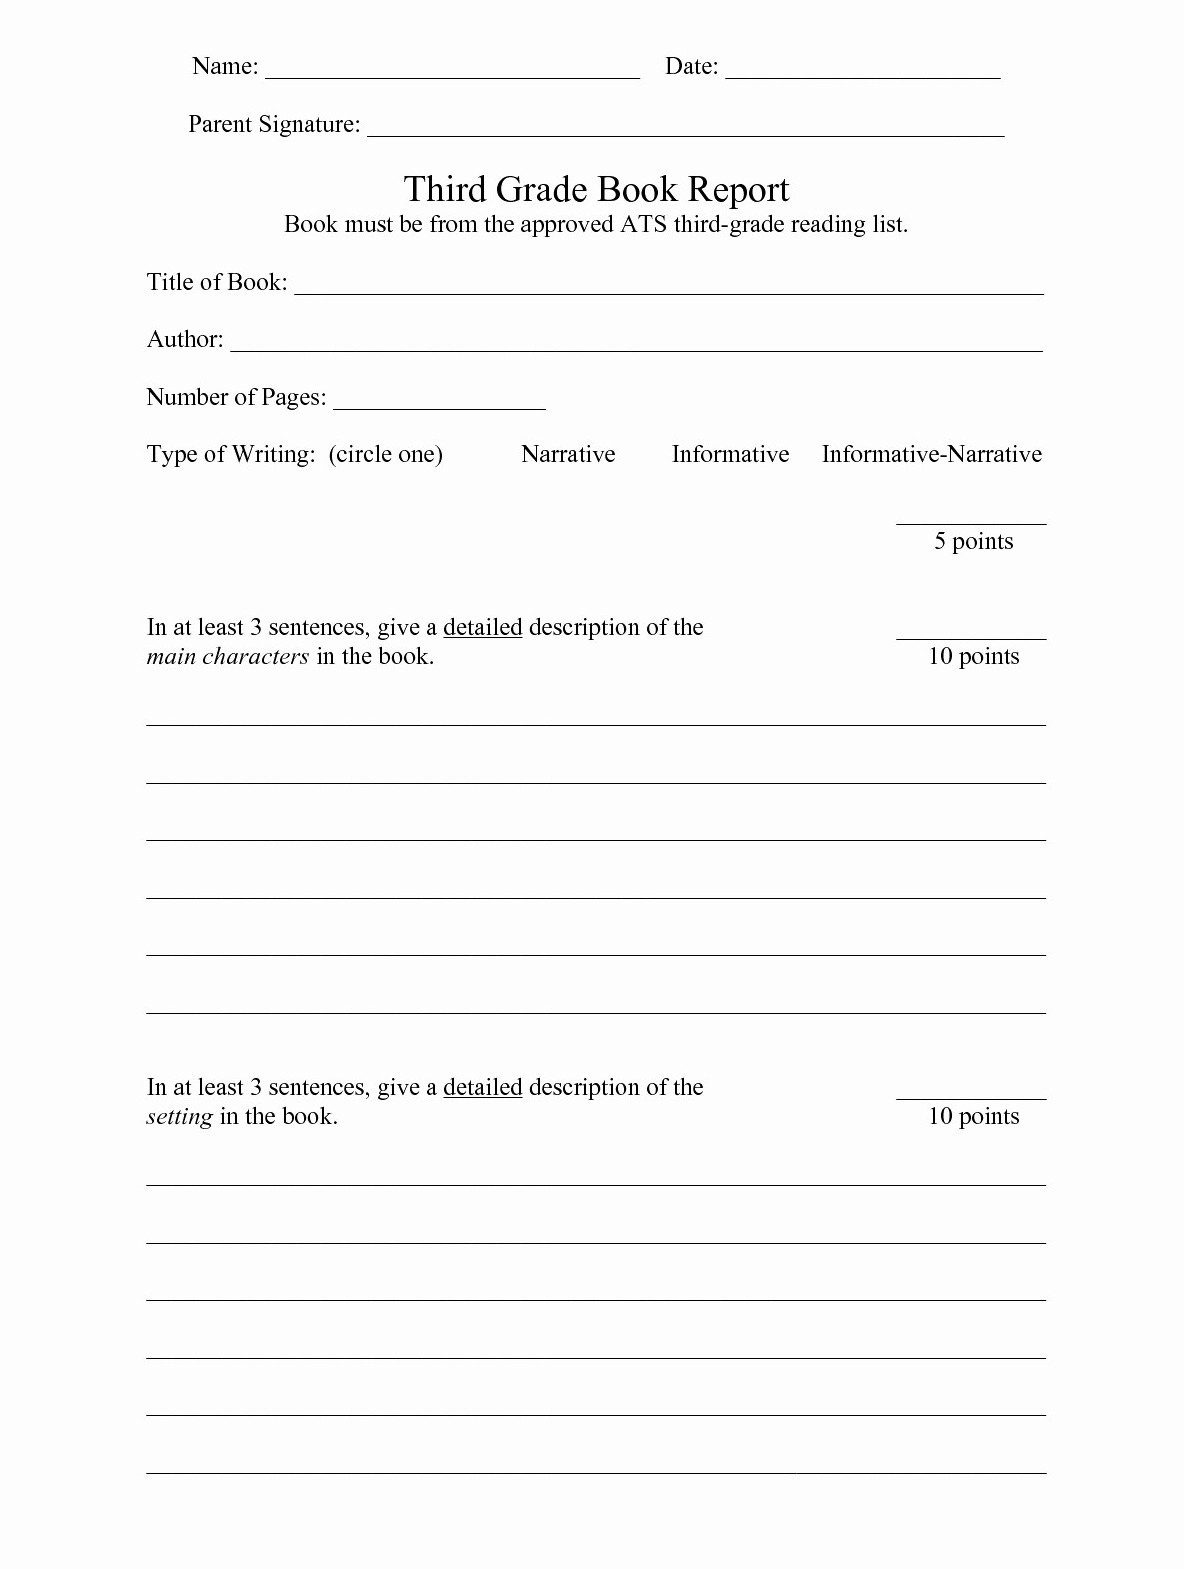 1St To 5Th Grade Book Report Template – One Platform For Throughout Book Report Template 3Rd Grade